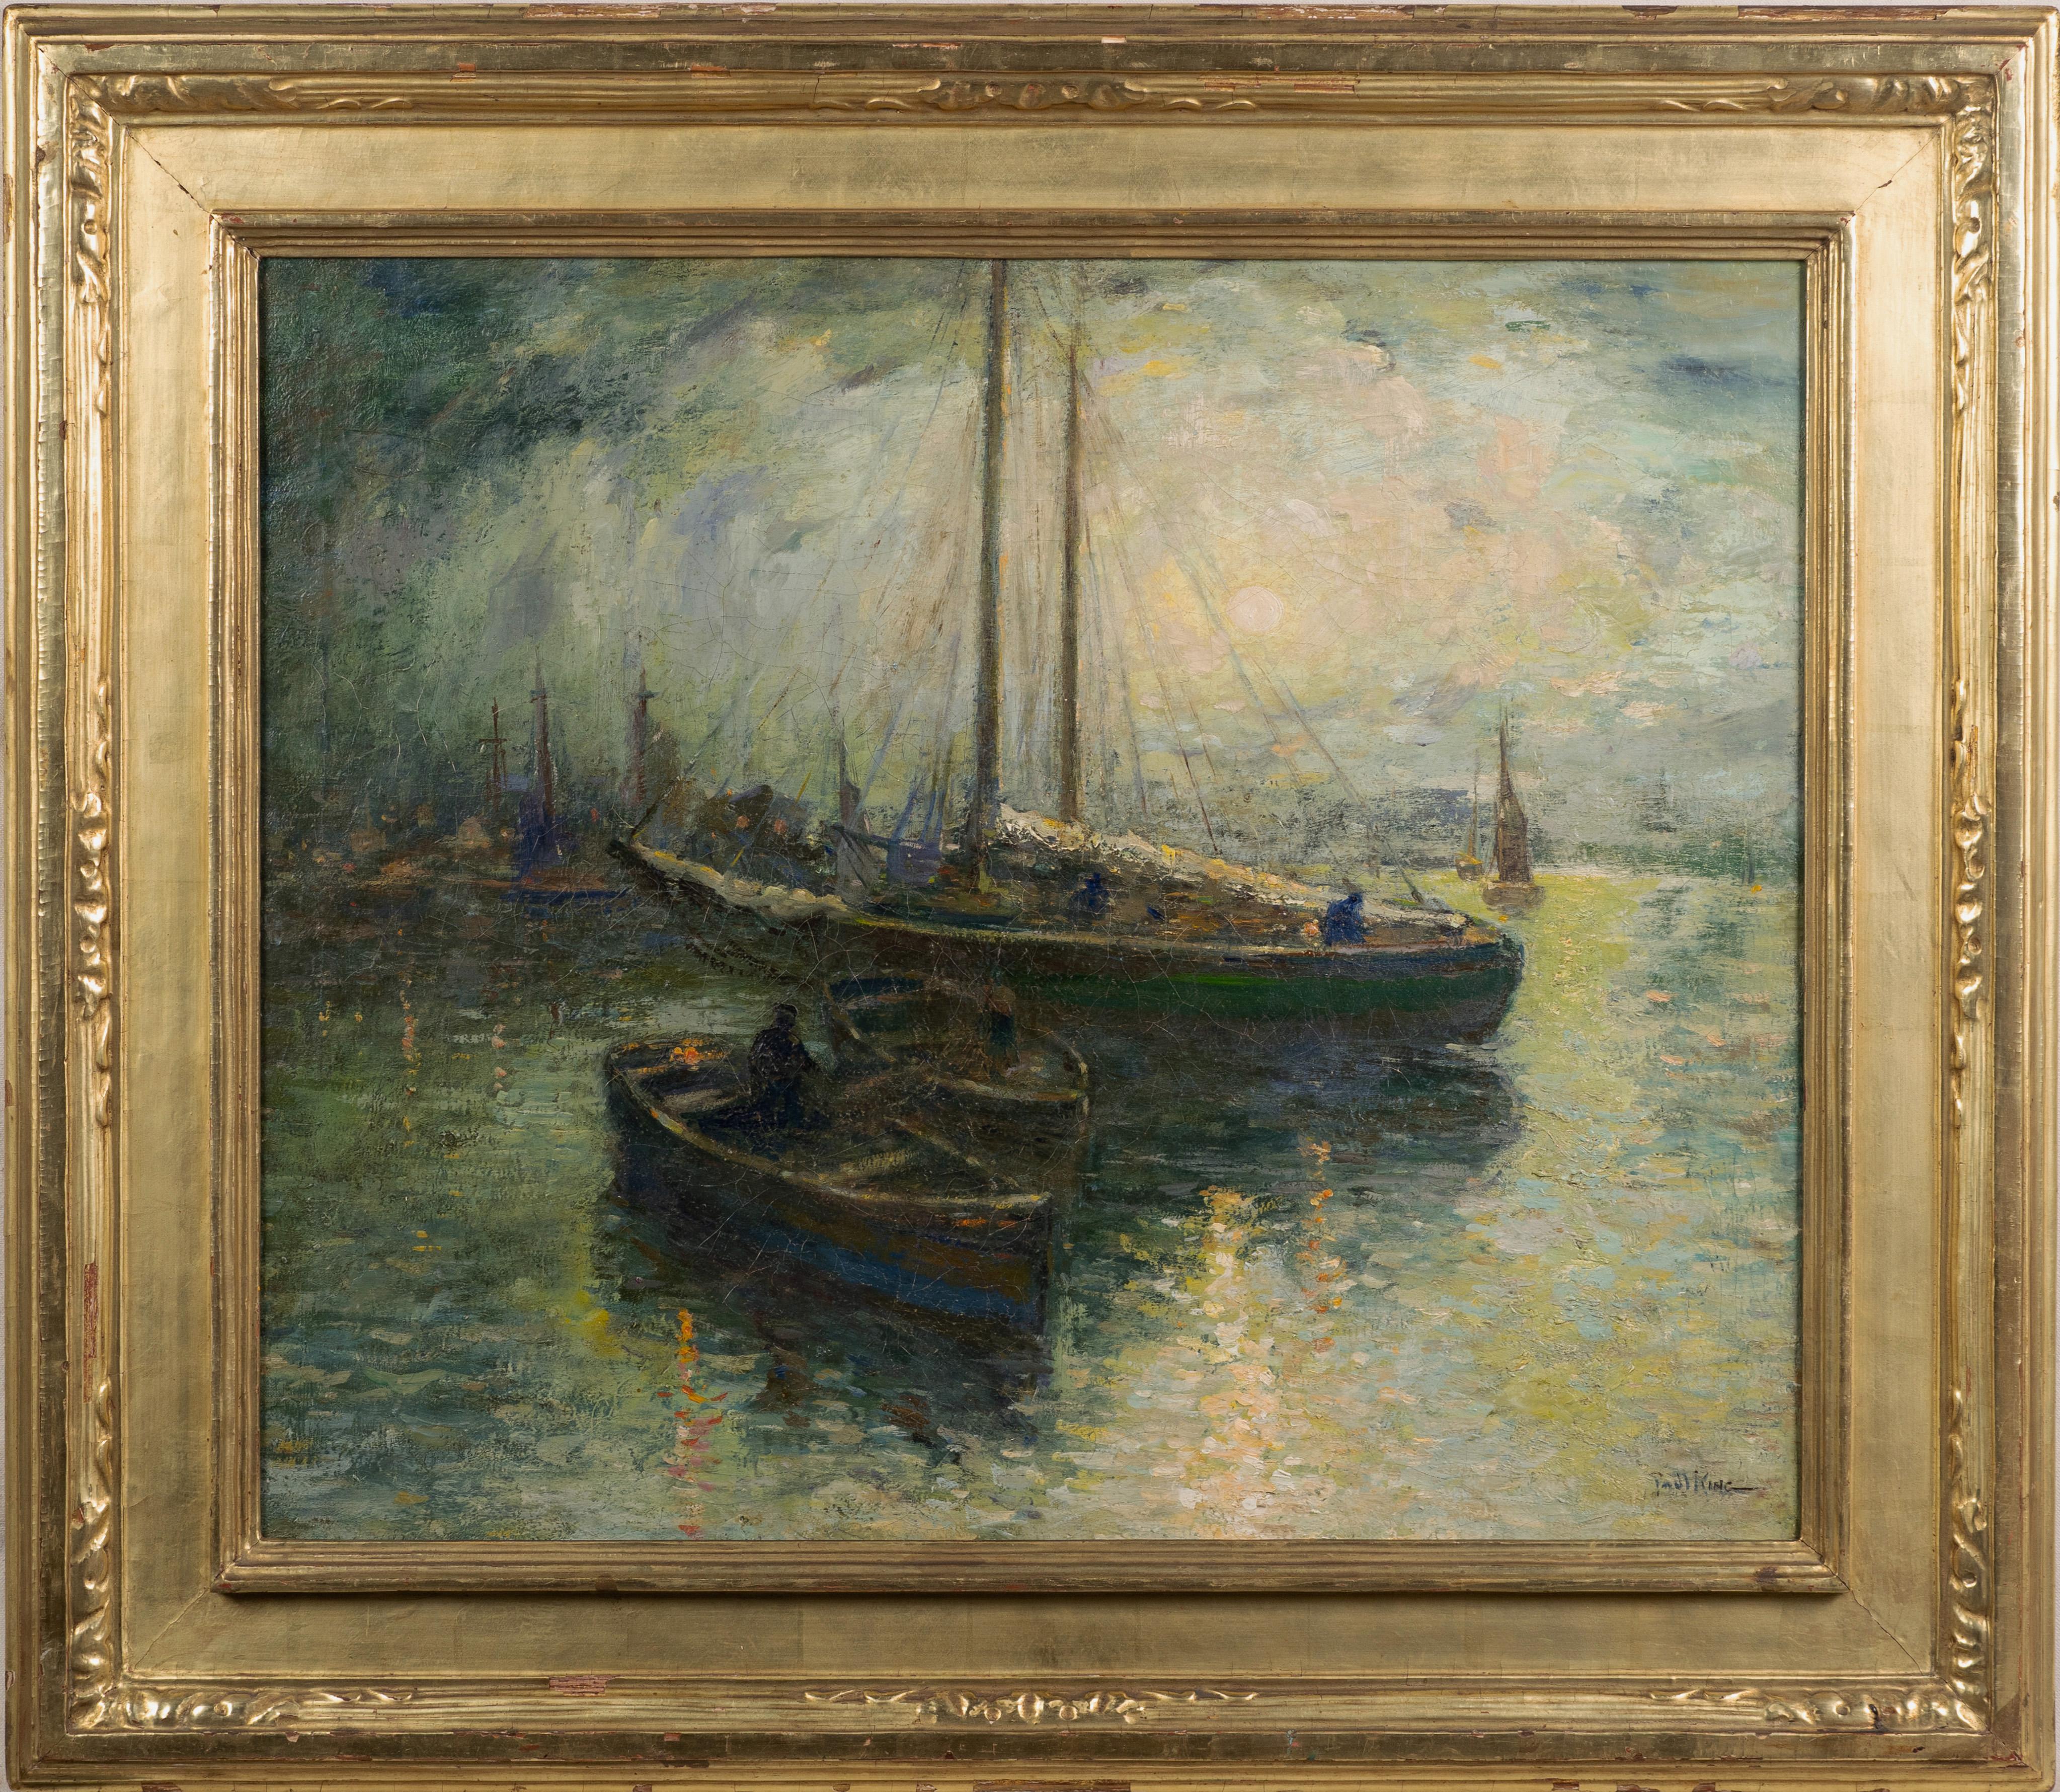 Paul King Landscape Painting - Antique American Impressionist New York Harbor Large Seascape Signed Painting